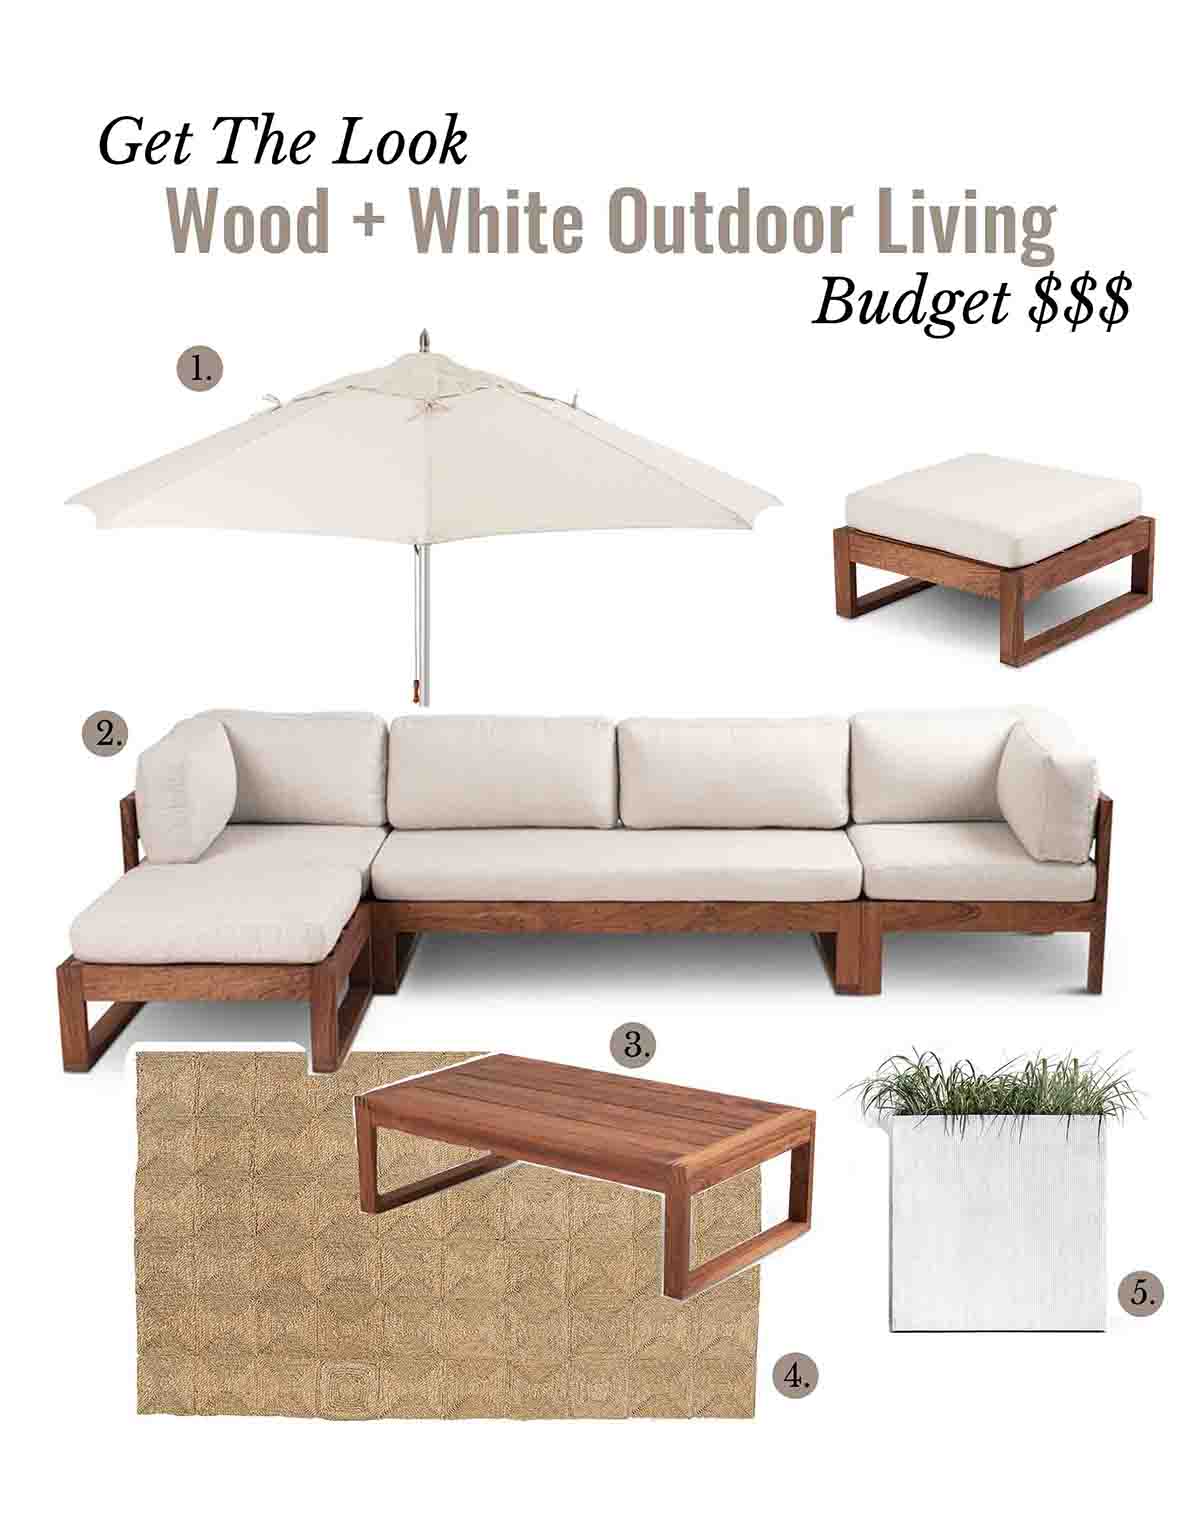 Wood and White Outdoor Living Budget